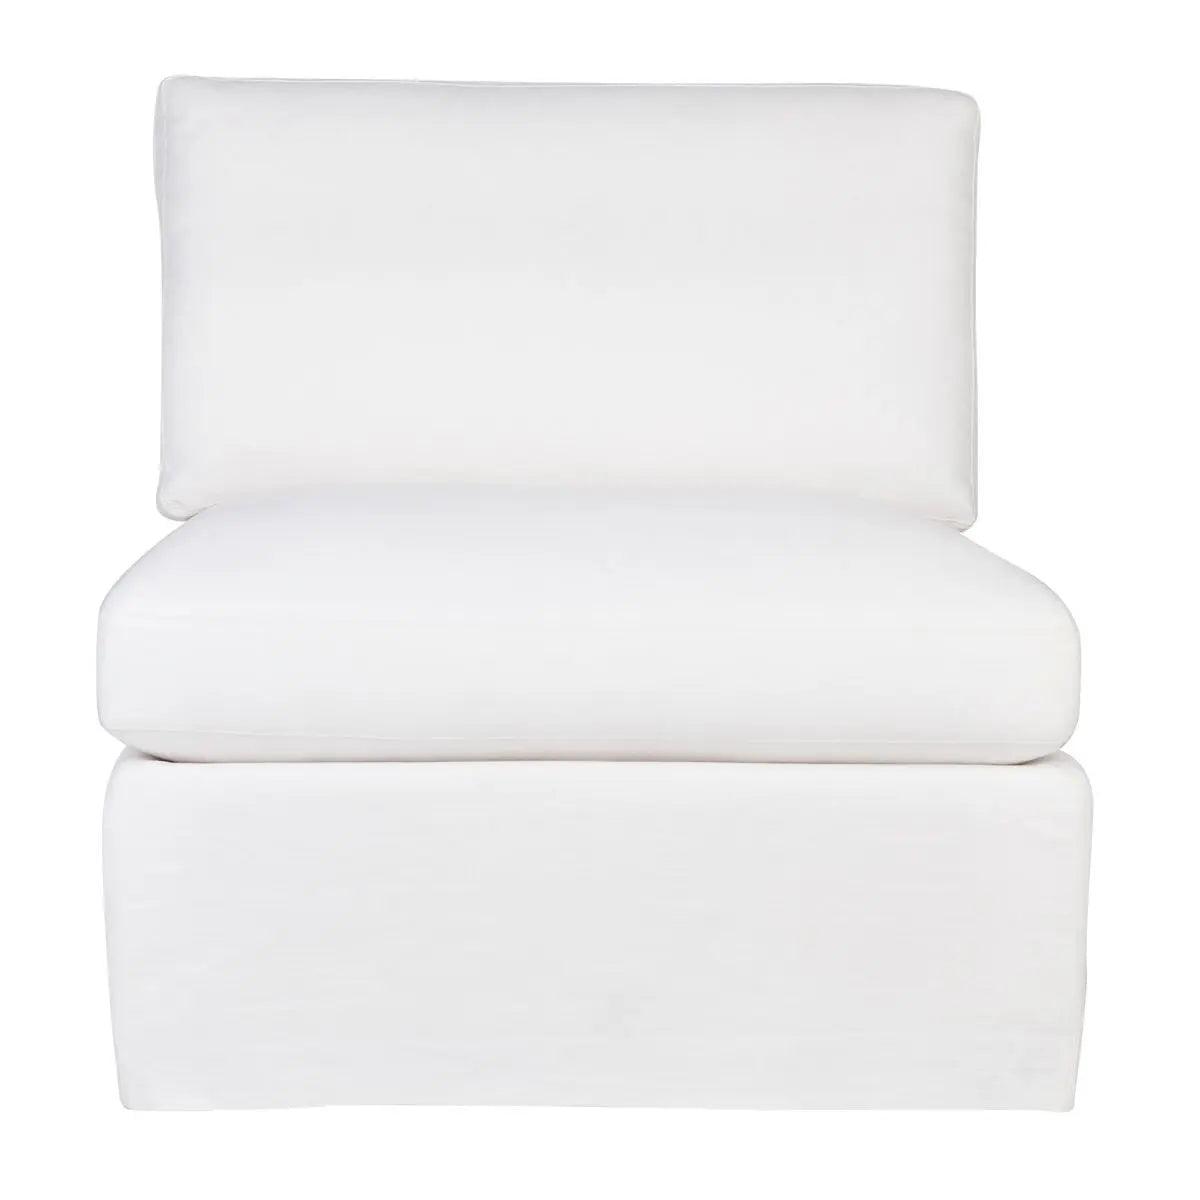 Cafe Lighting & Living Birkshire Slip Cover Occasional Chair - White Linen - Occasional Chair324569320294120910 9